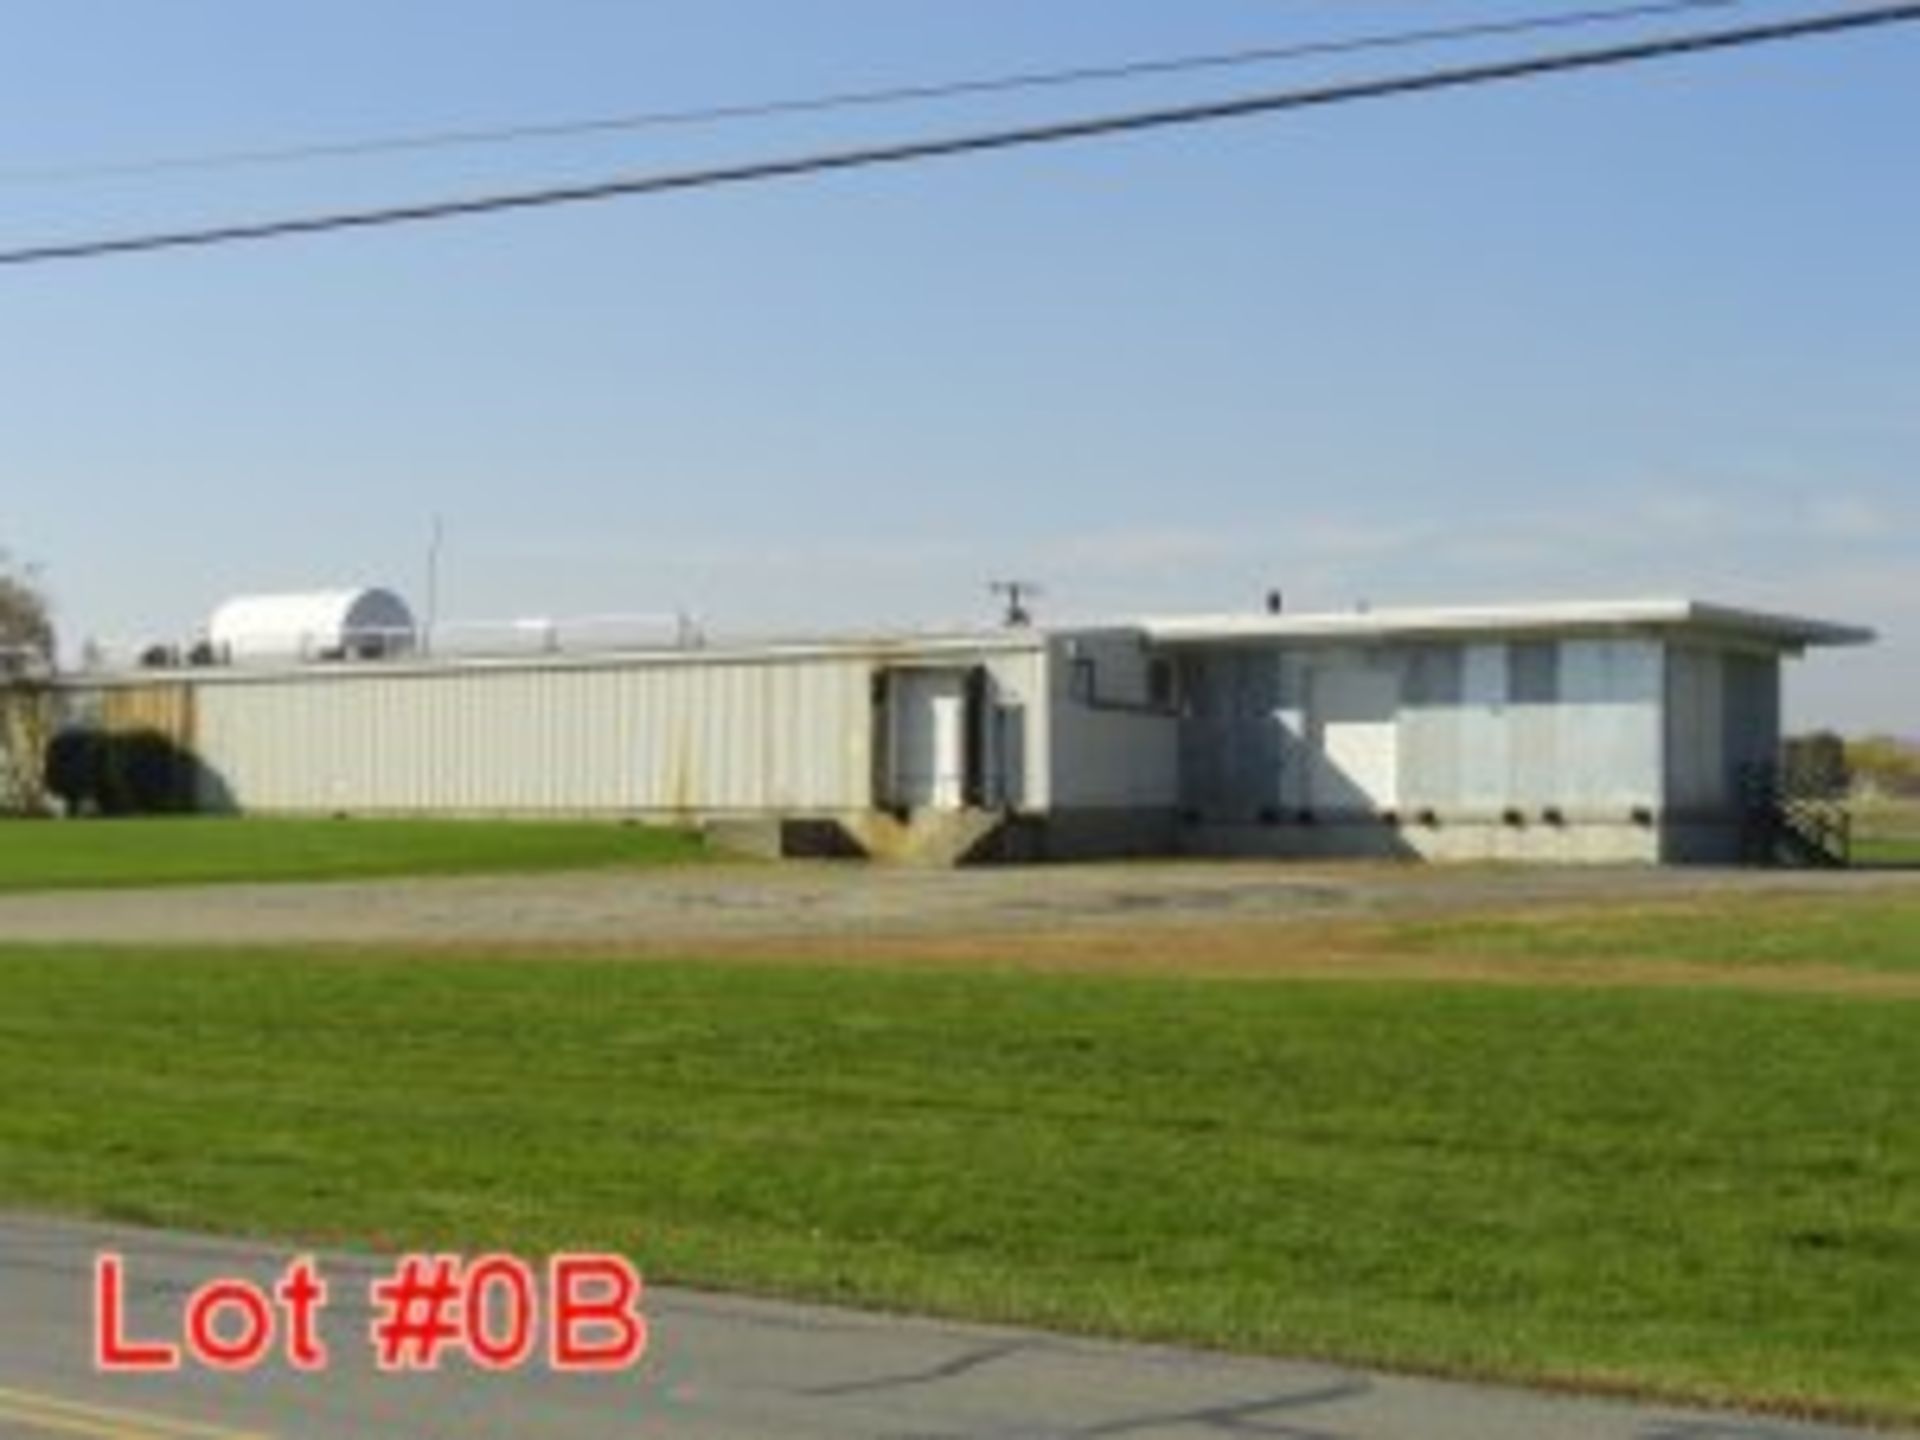 REAL PROPERTY ONLY: HIS LOT INCLUDES THE REAL PROPERTY LOCATED AT 900 NORTH CENTER ST. VERSAILLES OH - Image 6 of 6